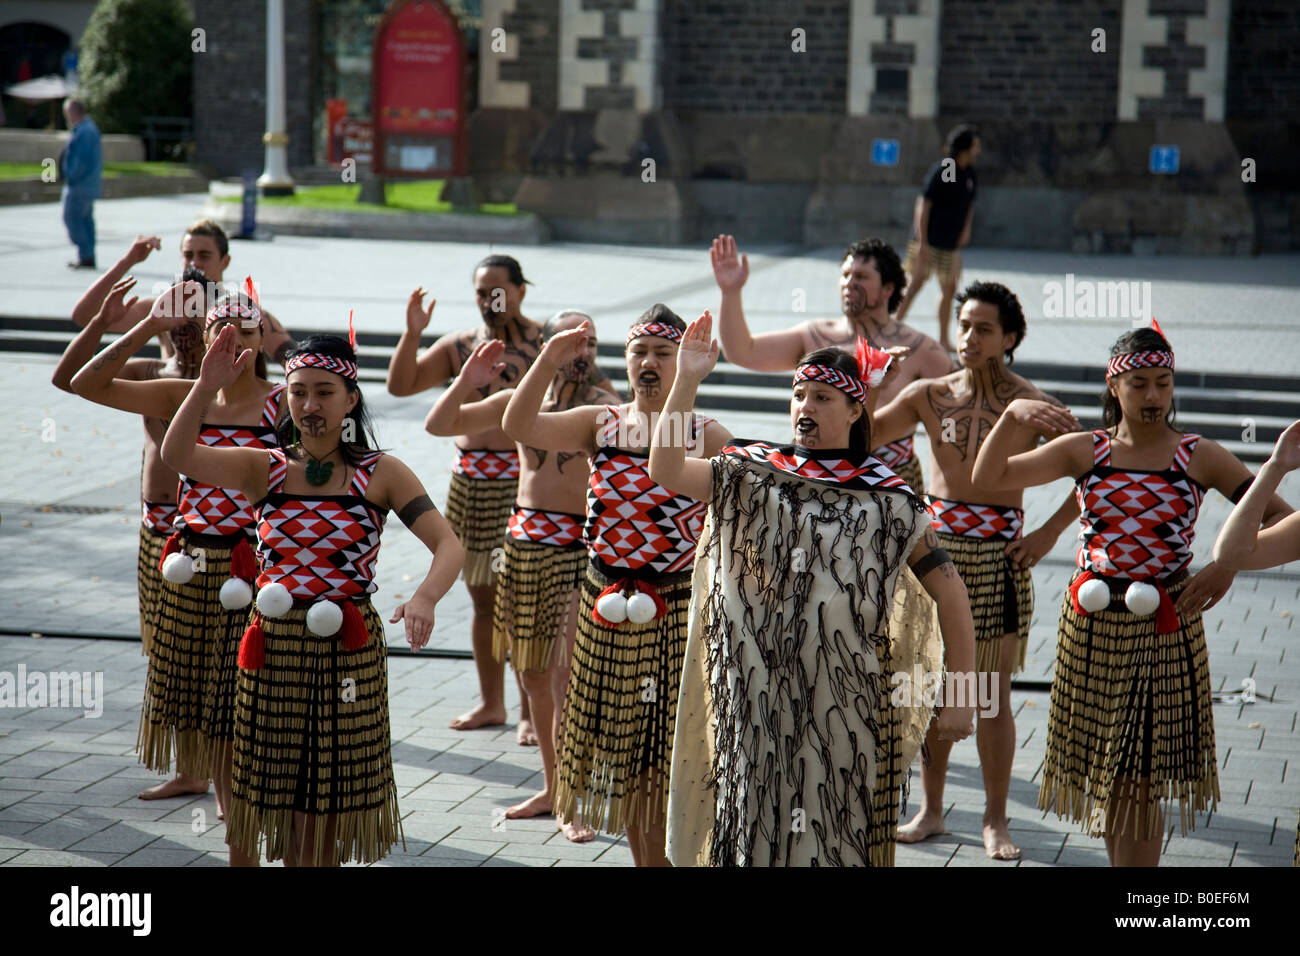 Maori dance group, indigenous Polynesian people, perform song and dance routine in public square in Christchurch,New Zealand,2008 Stock Photo